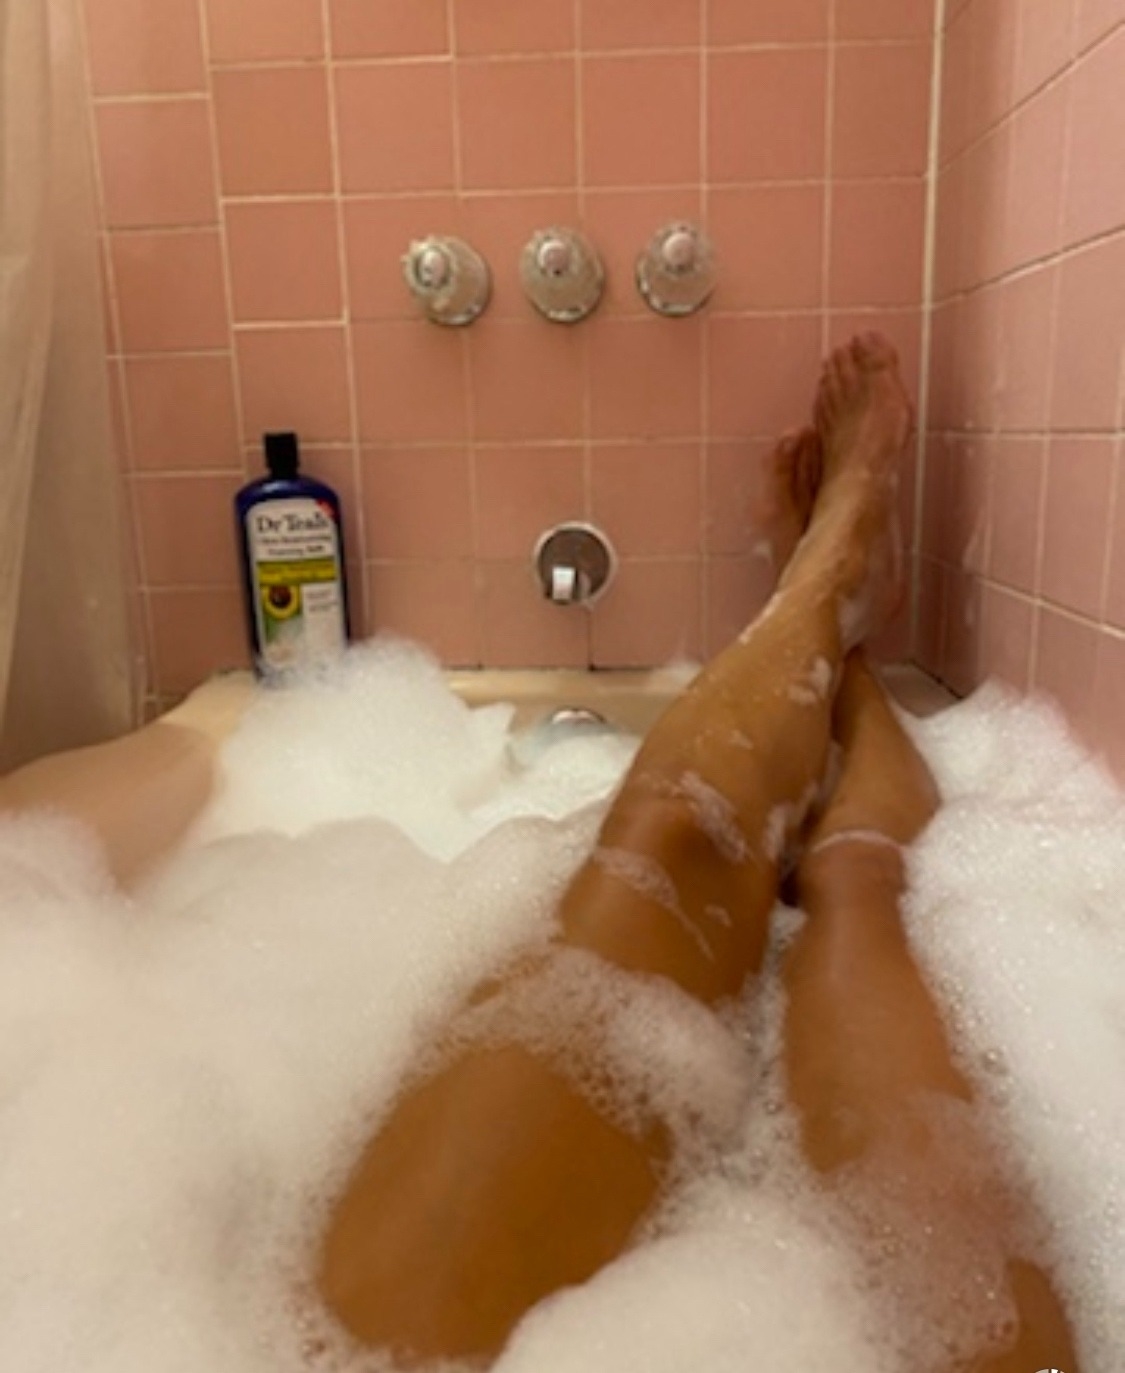 Reviewer relaxing in foaming Dr. Teal&#x27;s avocado oil bubble bath